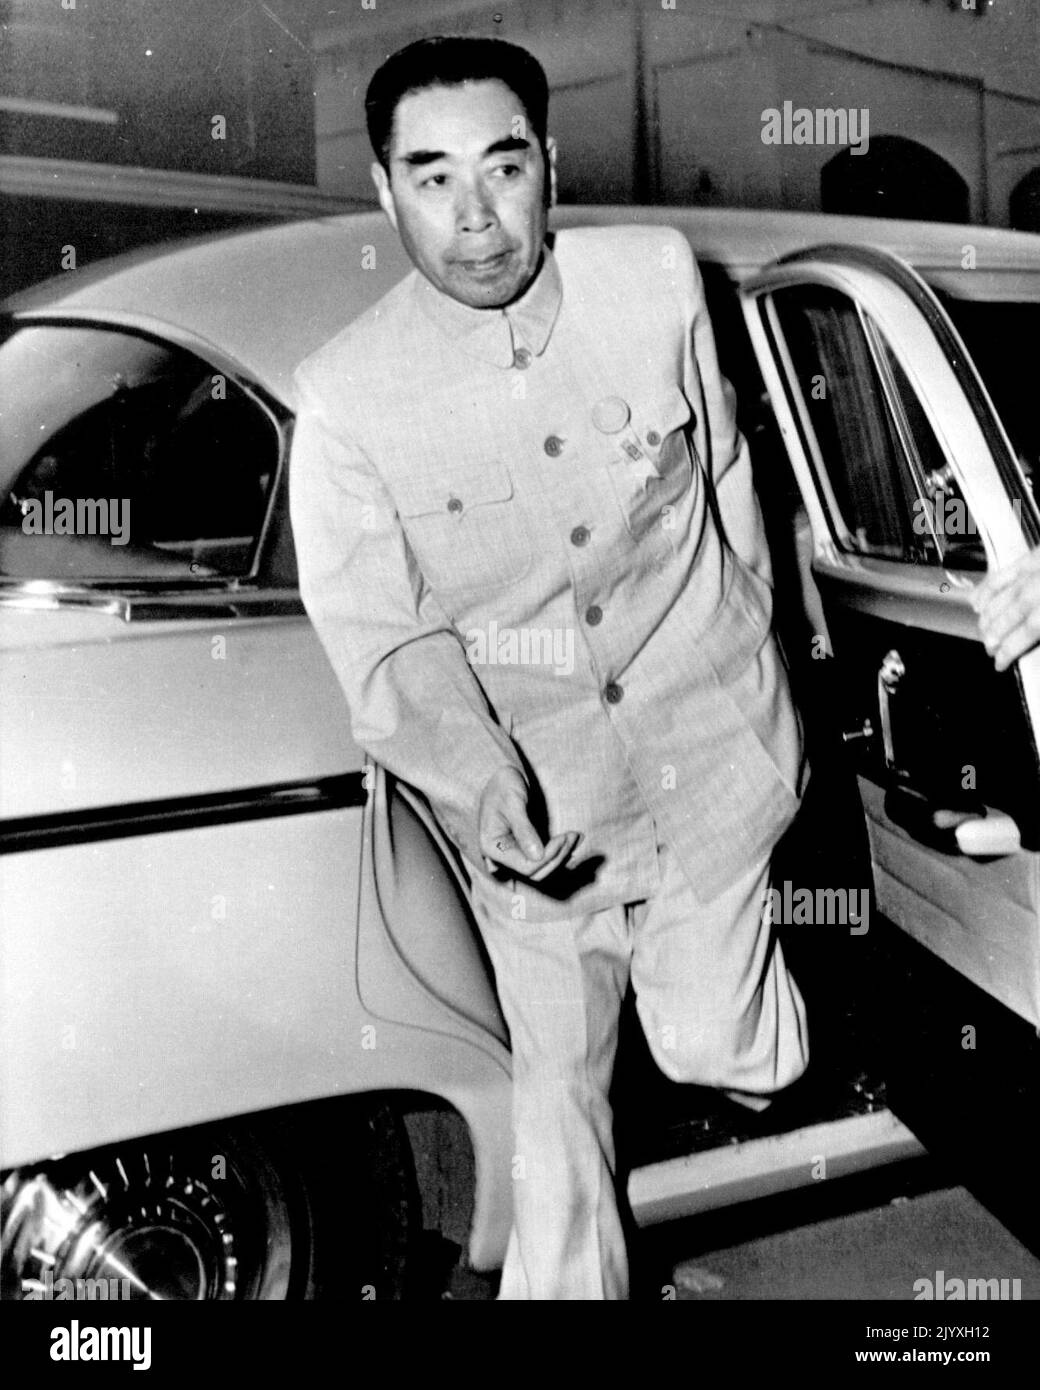 Chou Arrives For Conference -- Red China Premier Chou En-lai, who told the final session today of the 29-nation Asian-African Conference the United States and China should her together on settlement of the Formosa issue, slights from his car to attend Tuesday's meeting at Bandung, Indonesia. April 24, 1955. (Photo by AP Wirephoto). Stock Photo